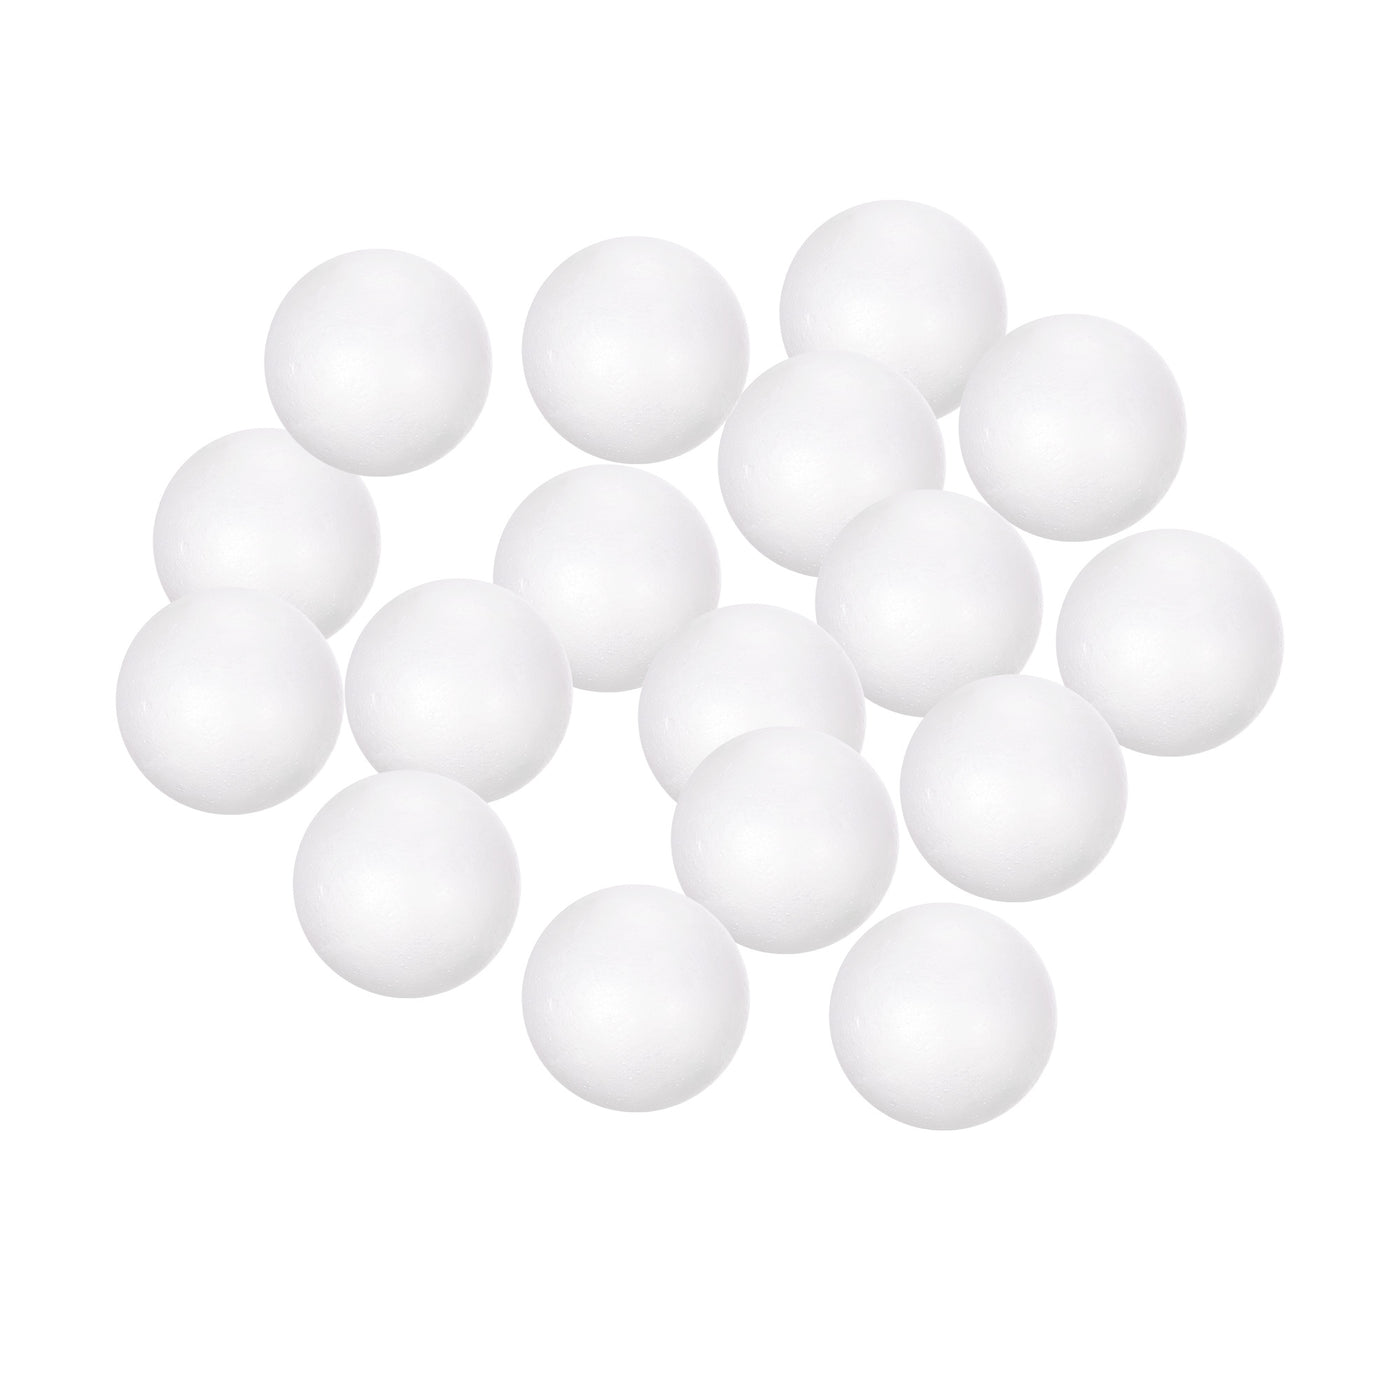 Uxcell Uxcell 36Pcs 2" White Polystyrene Foam Solid Balls for Crafts and Party Decorations